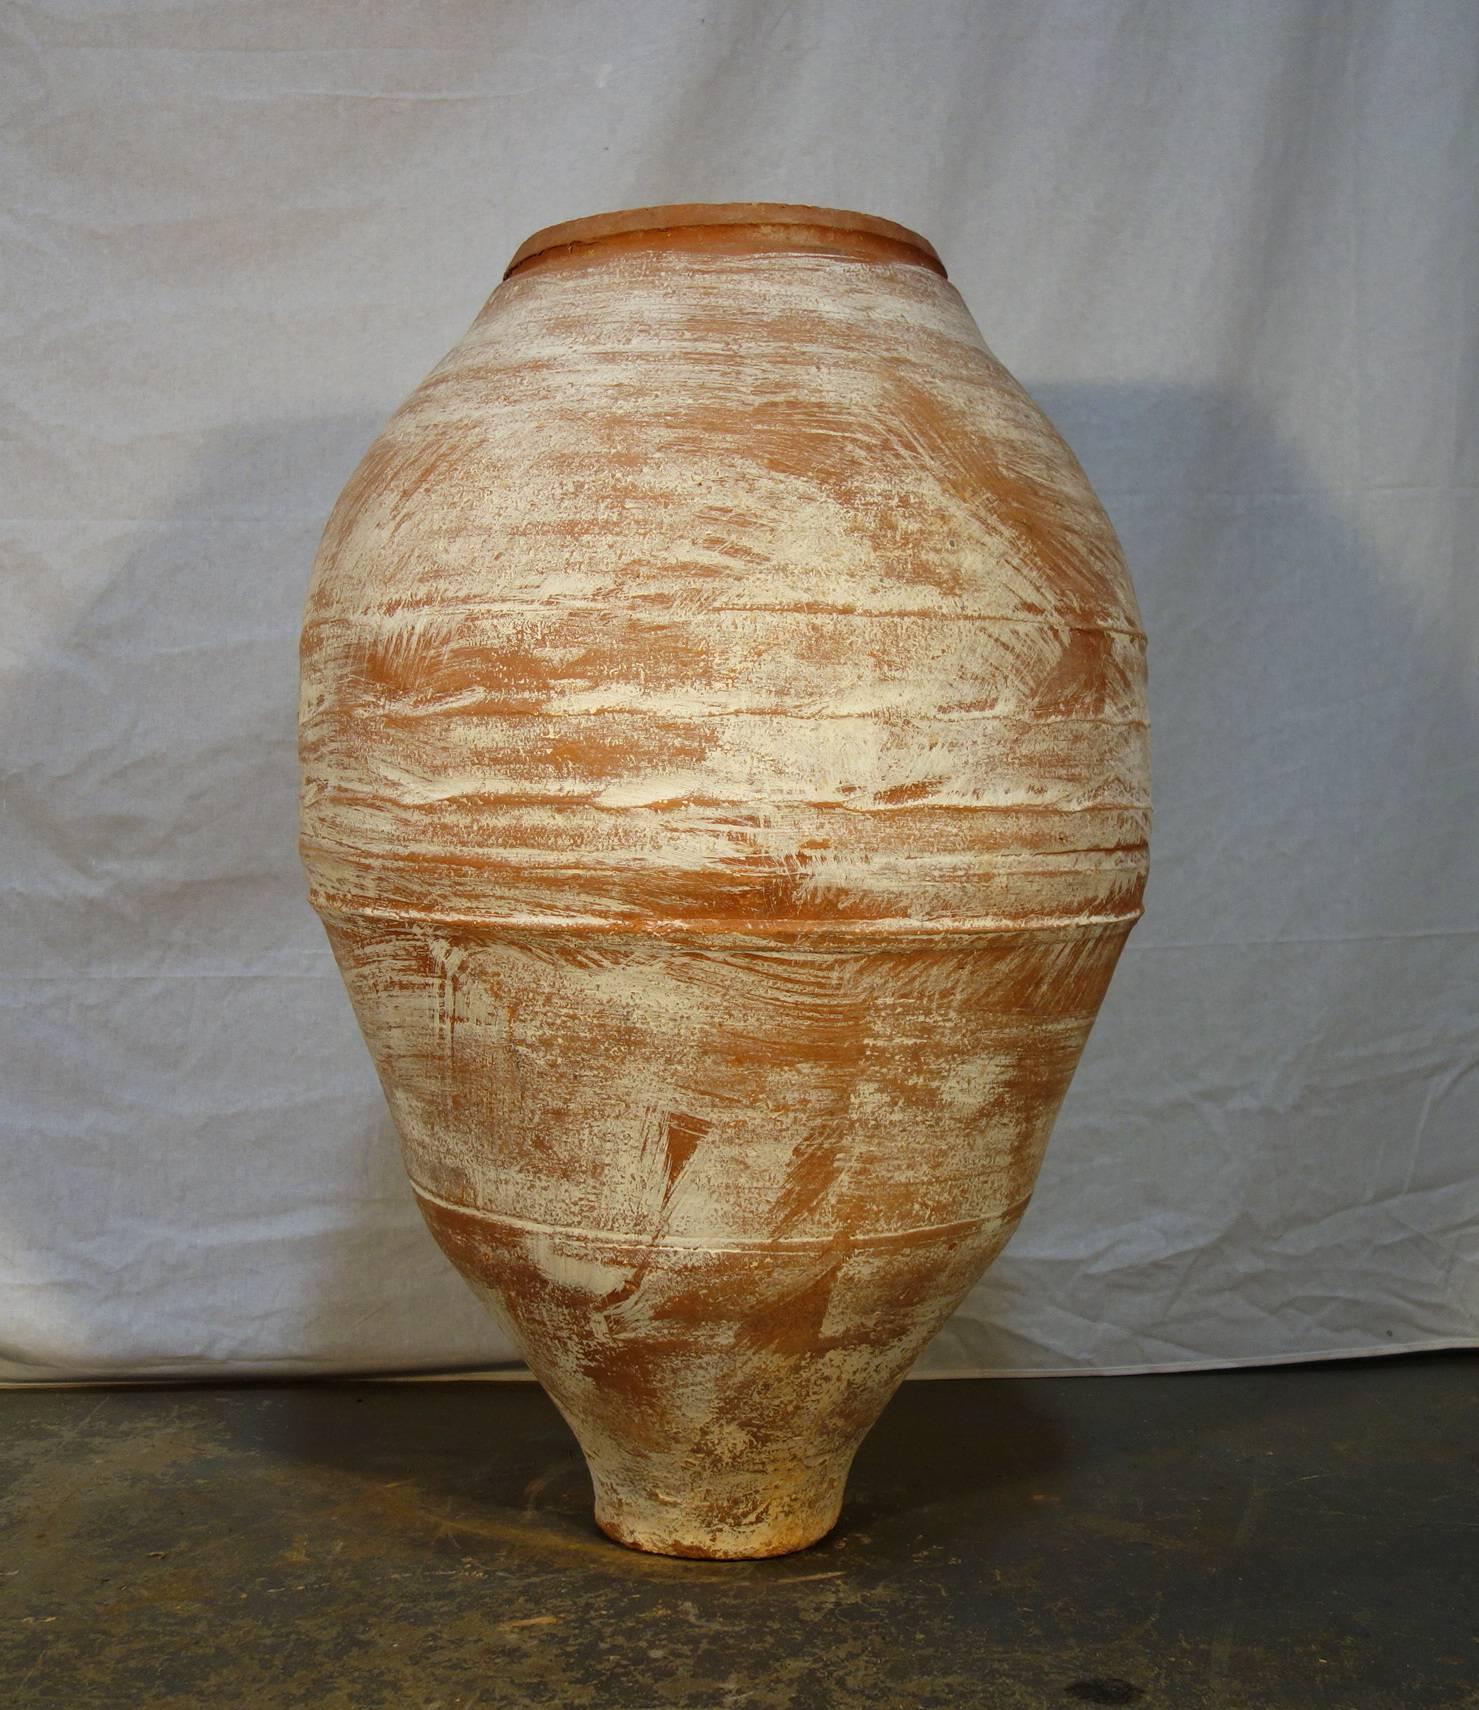 Simple line 19th century Greek water Amphora wonderful white lime patina, it was once used as storage and shipping jars for water. Tapered shape toward the bottom, with geometric and midwidth scoring.
Moderate white patina.
Dimensions are:  21